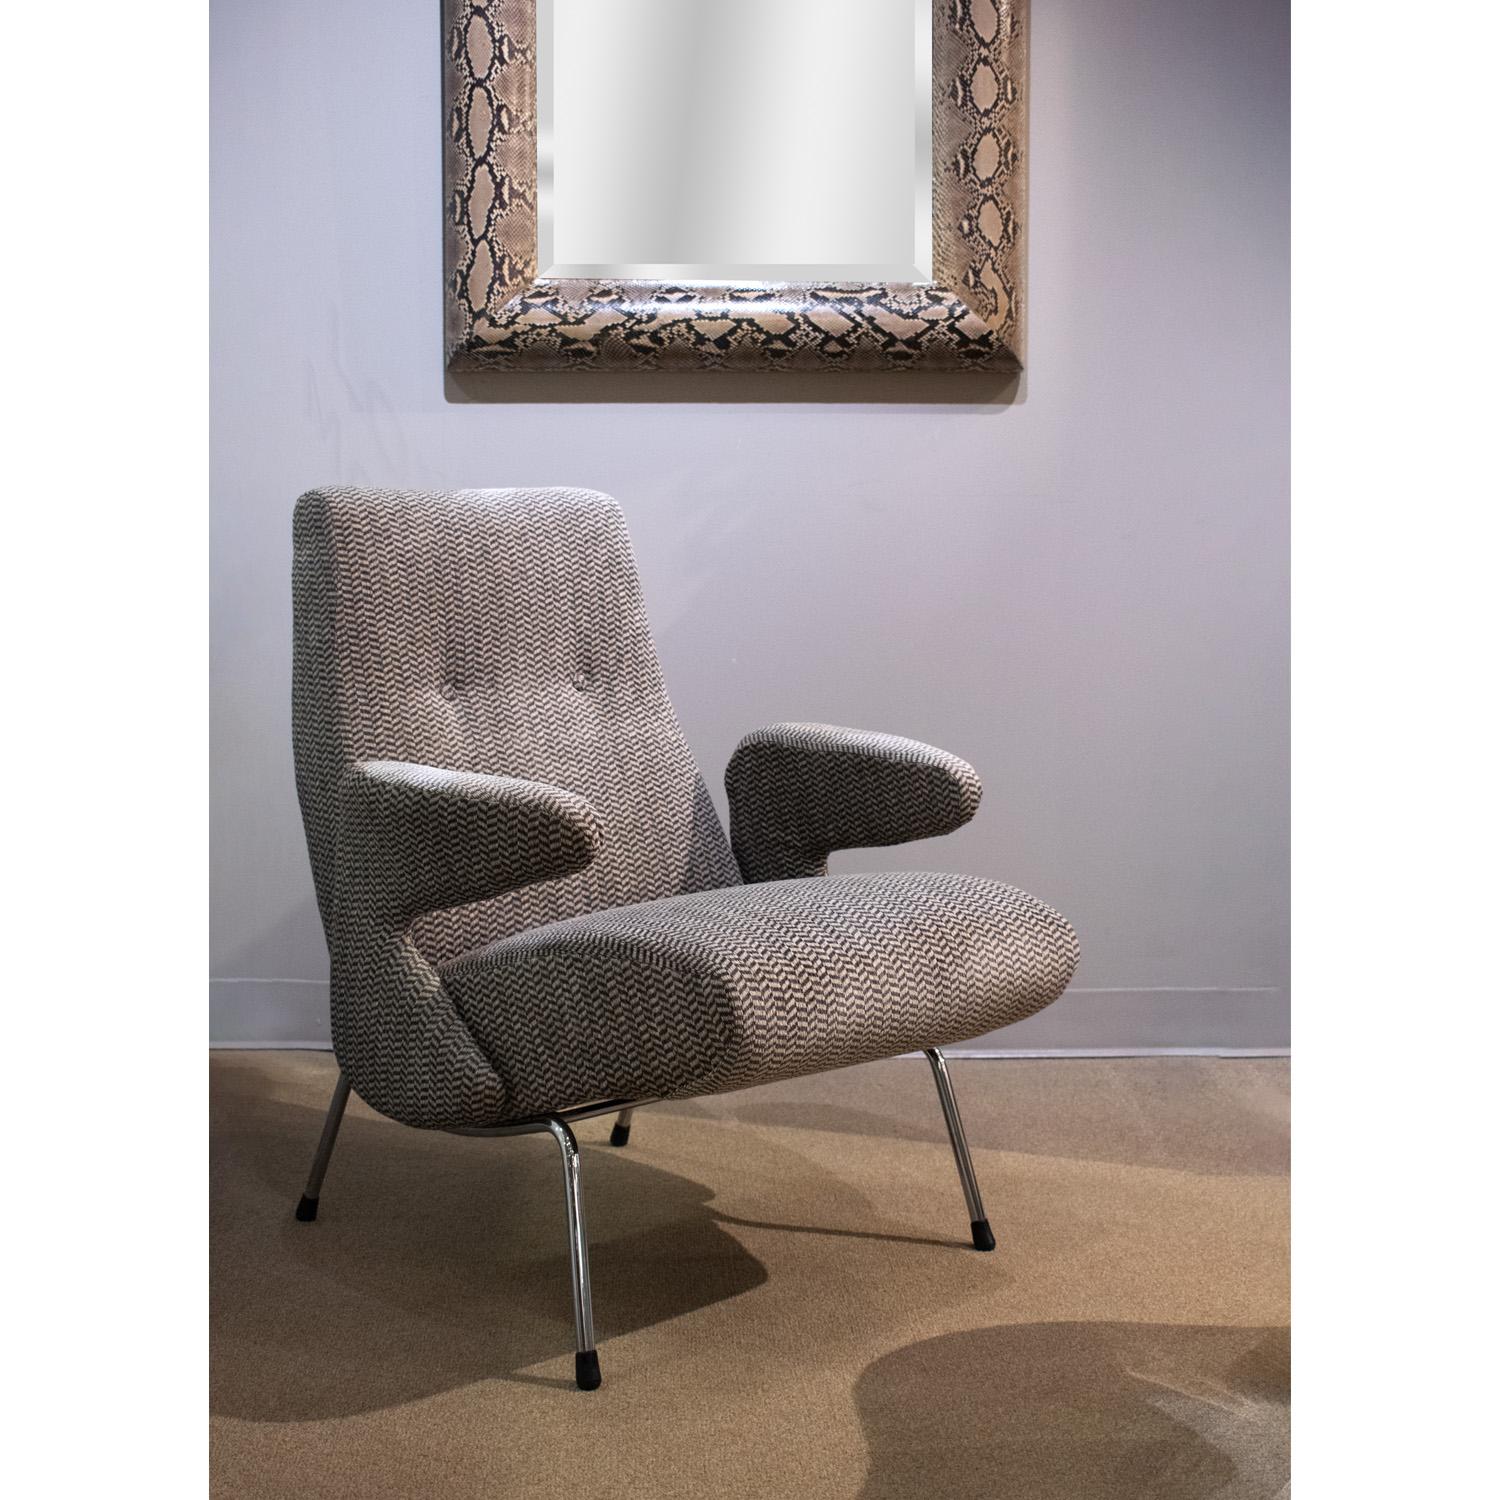 Upholstery Sculptural Italian Lounge Chair with Chrome Base 1960s For Sale